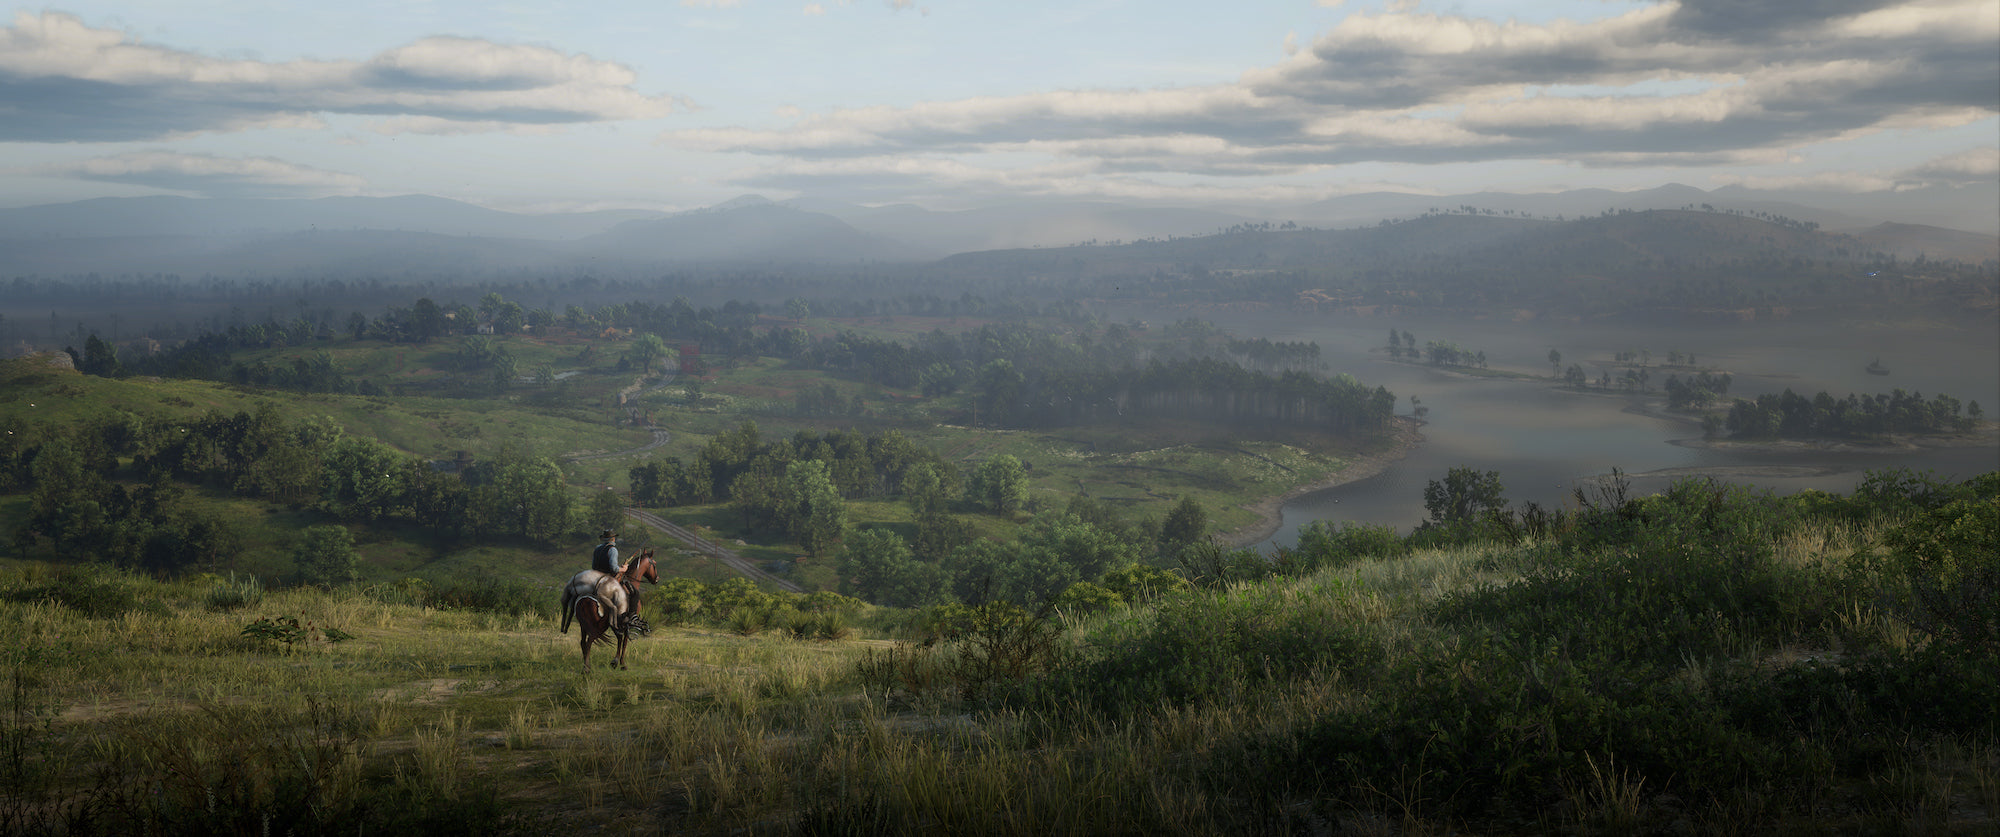 Red Dead Redemption 2 shot by Jim2point0. 